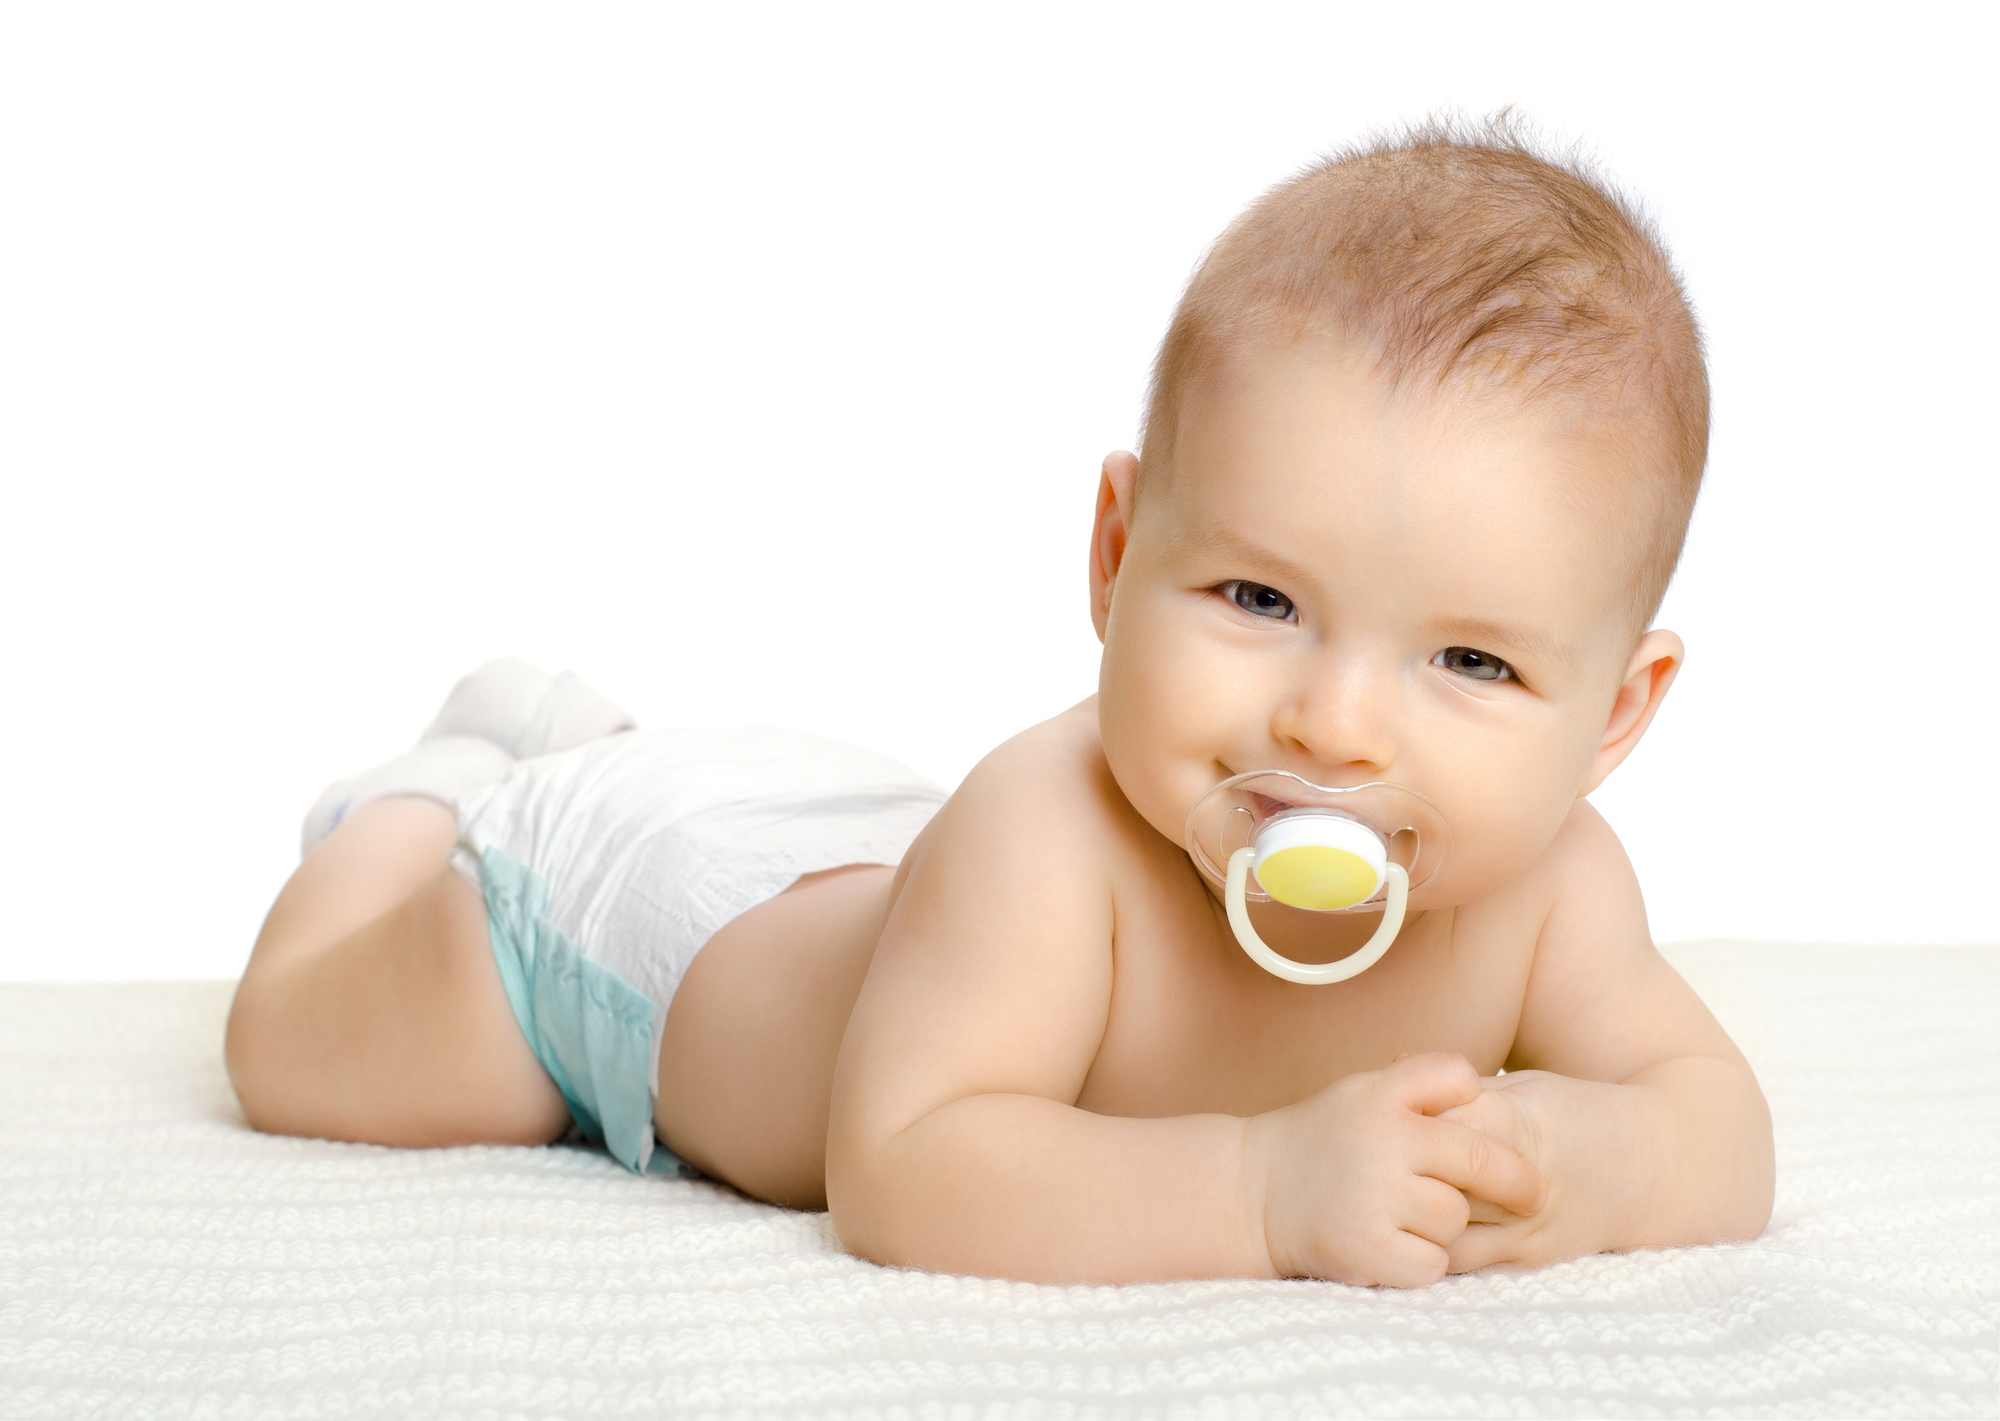 Pacifier Use and Myofunctional Development